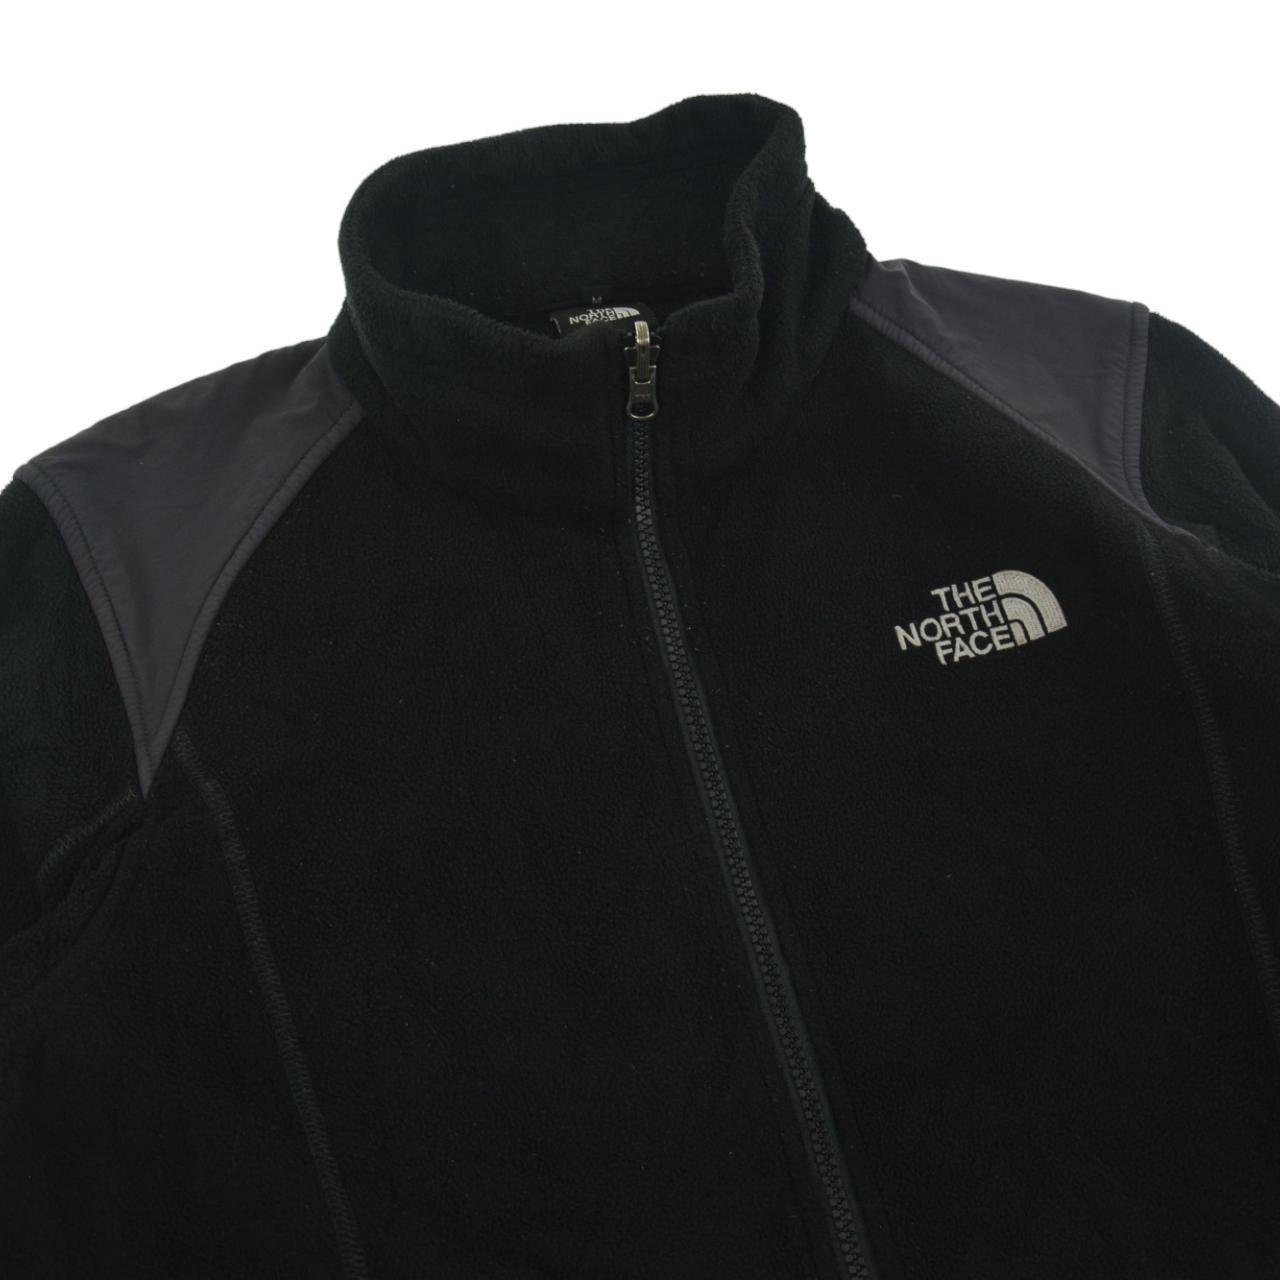 Vintage The North Face Fleece Jacket Size M - Known Source